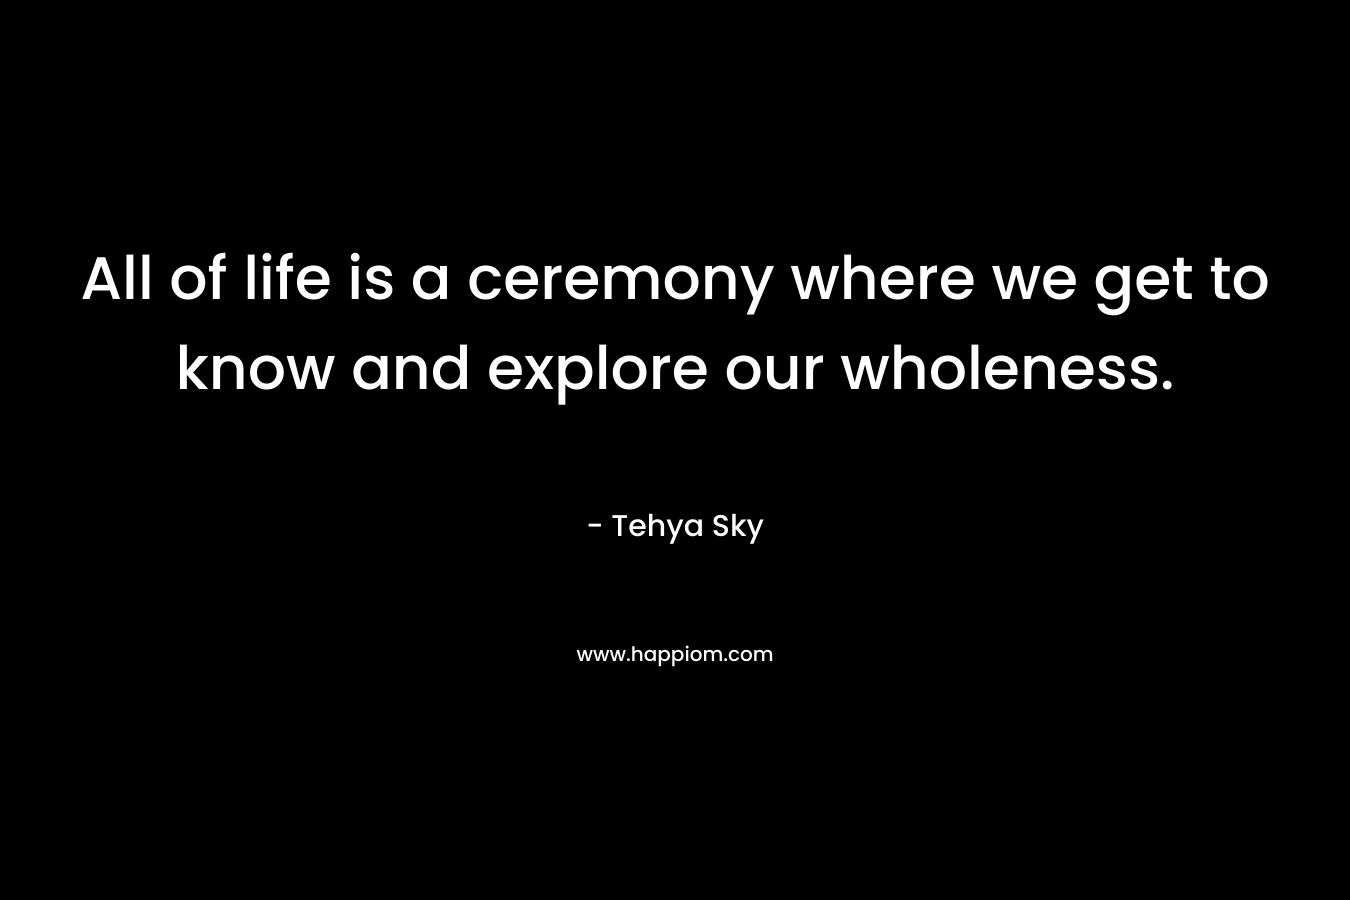 All of life is a ceremony where we get to know and explore our wholeness. – Tehya Sky